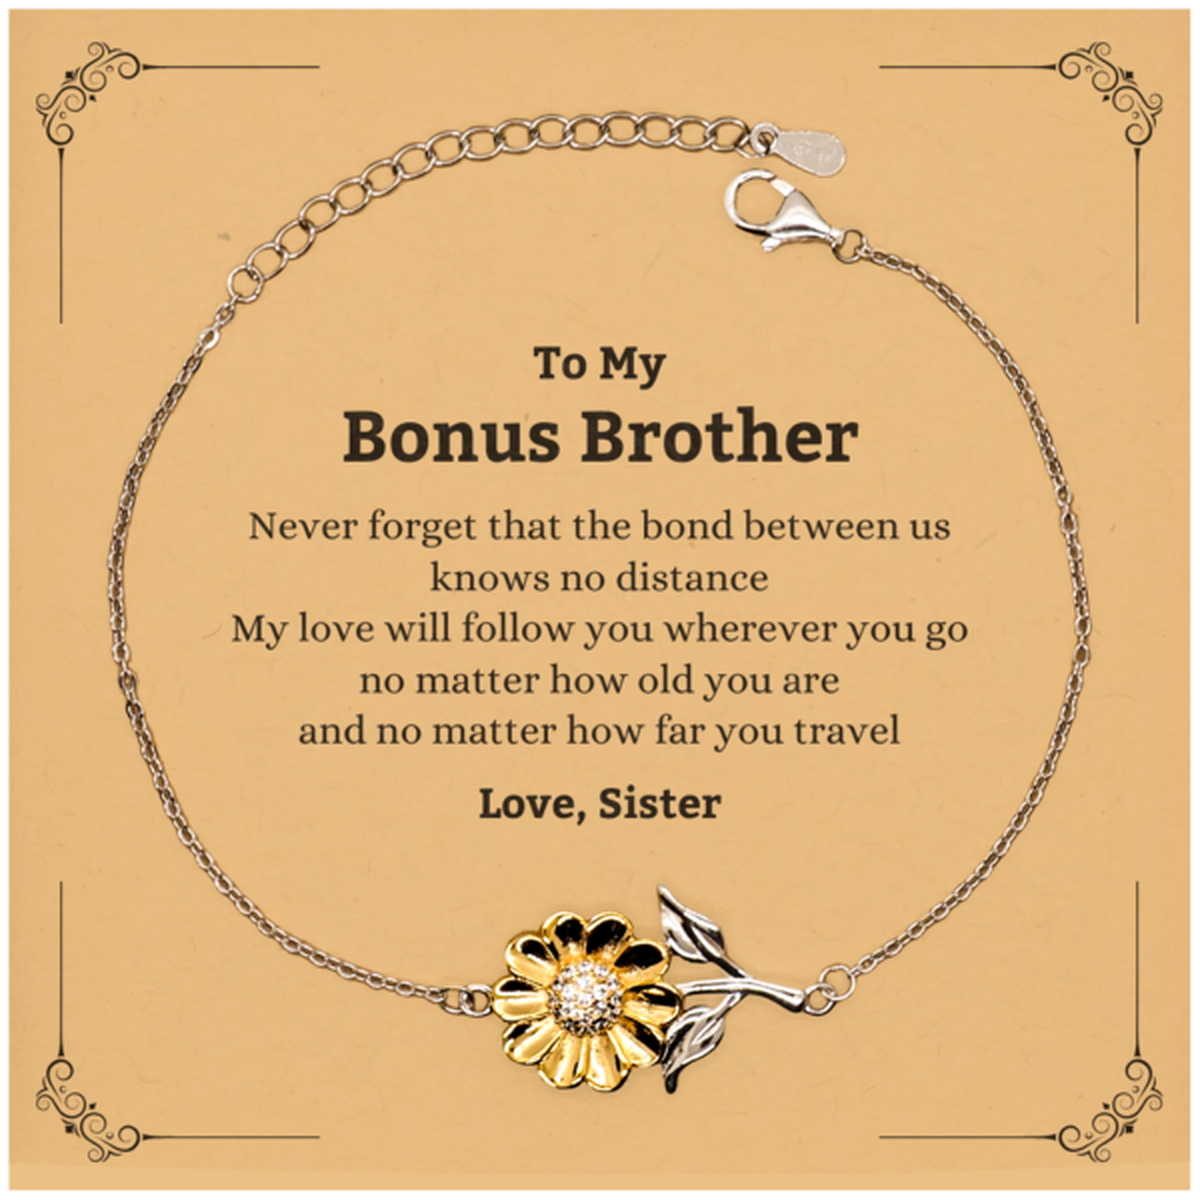 Bonus Brother Birthday Gifts from Sister, Adjustable Sunflower Bracelet for Bonus Brother Christmas Graduation Unique Gifts Bonus Brother Never forget that the bond between us knows no distance. Love, Sister